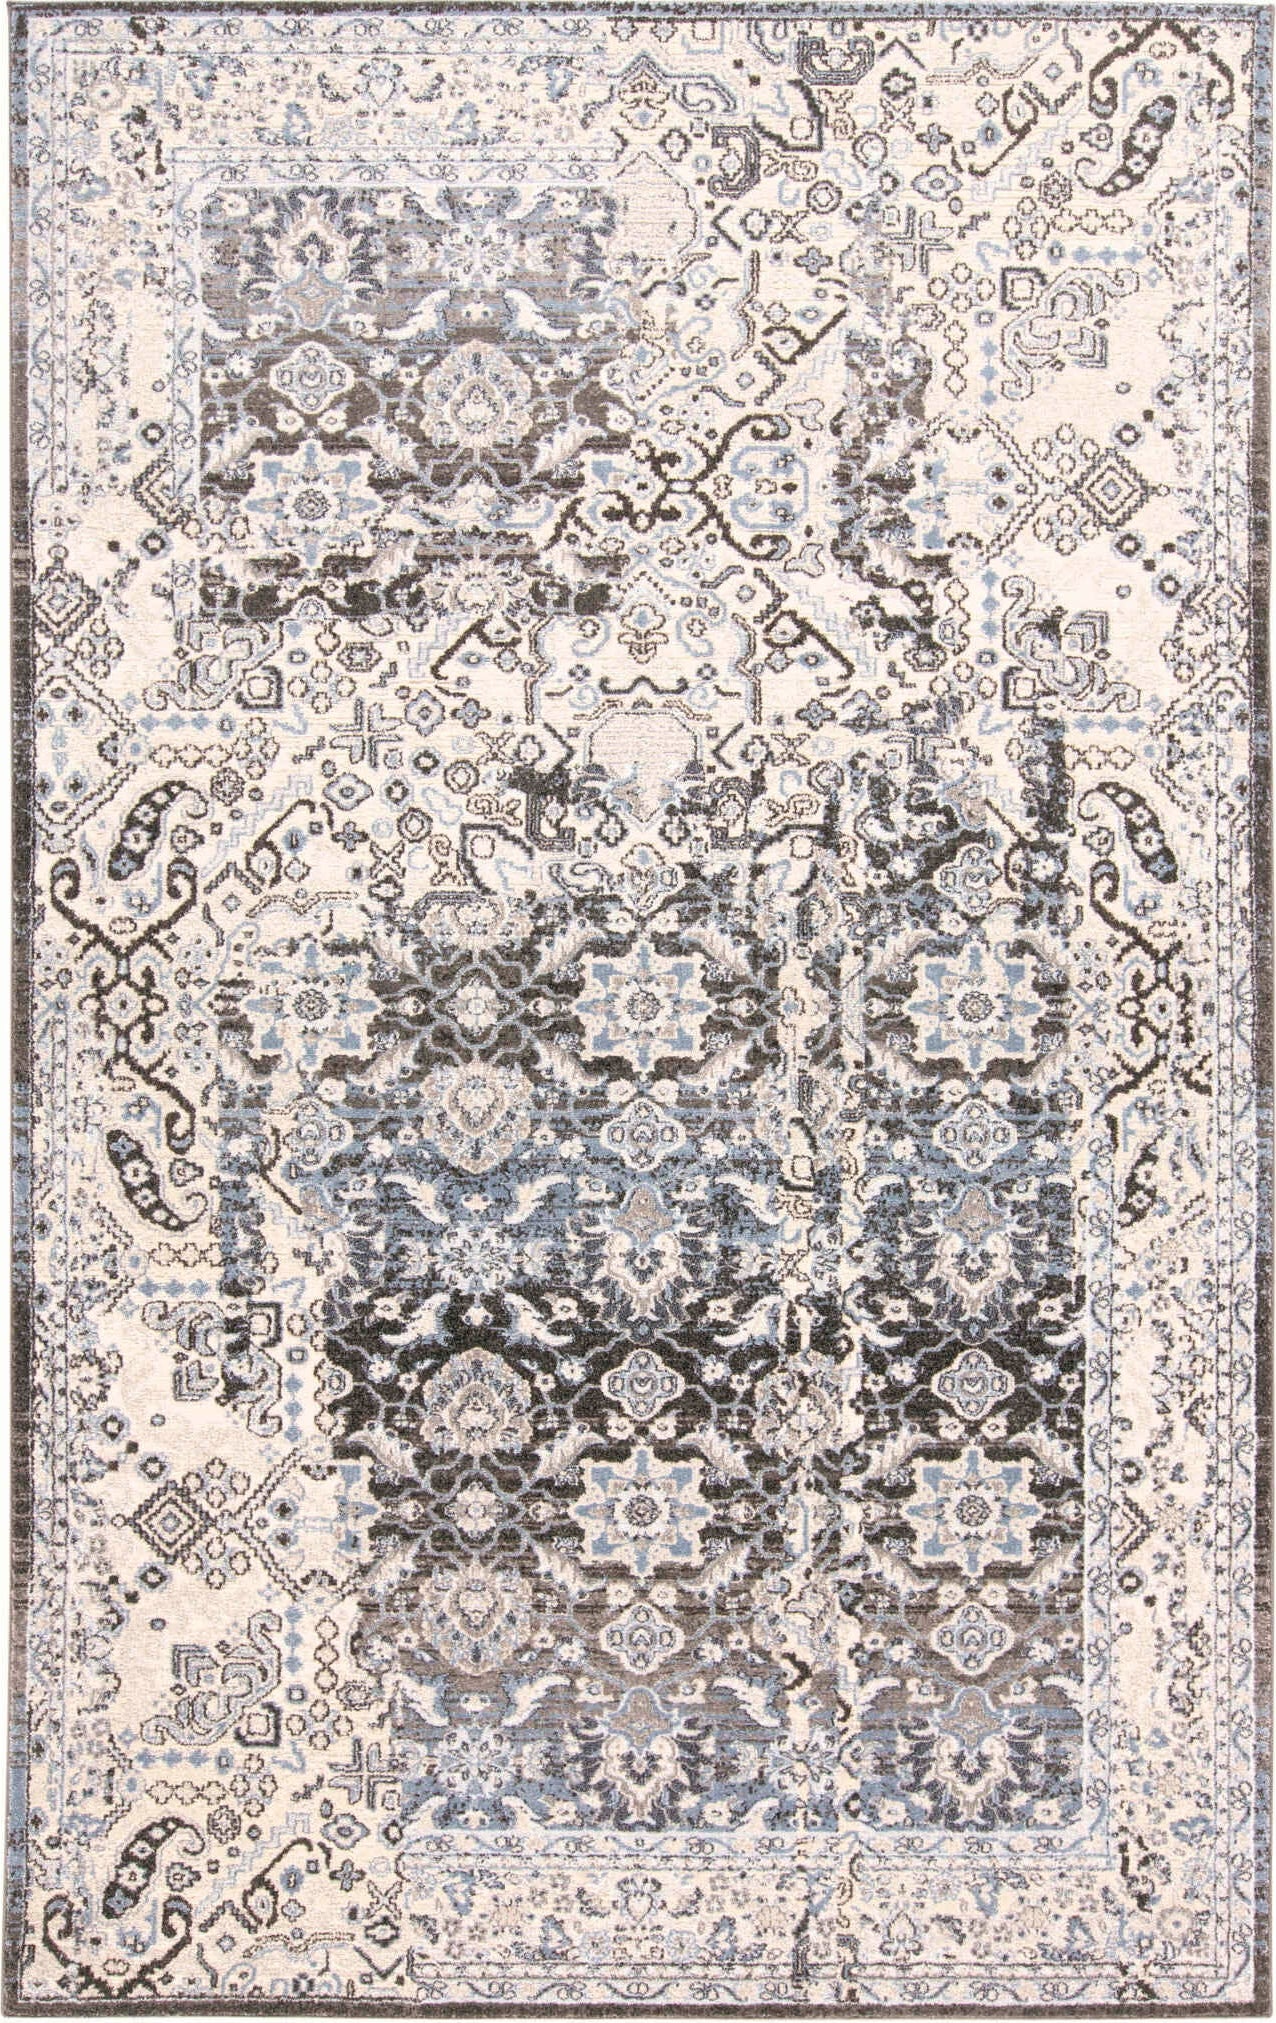 Feizy Ainsley 3898F Charcoal/Tan Area Rug